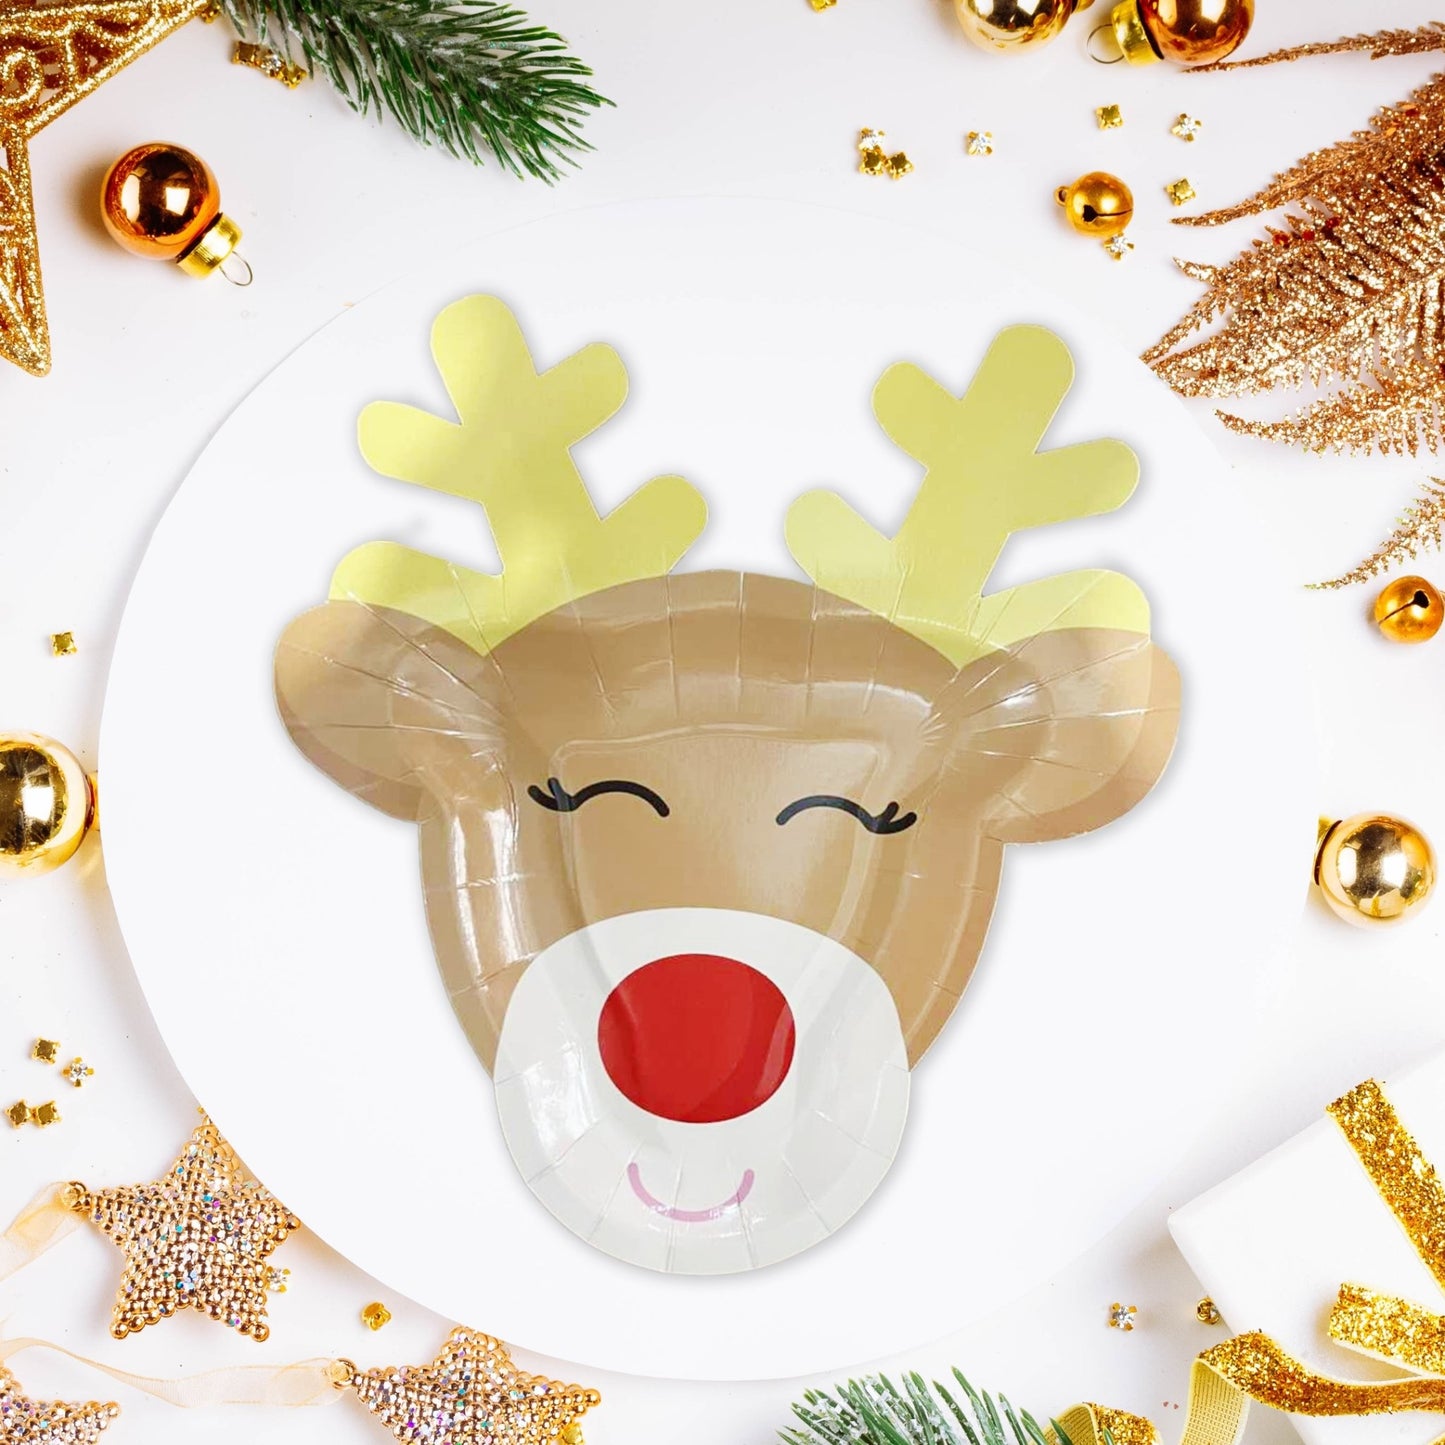 Christmas Candy Reindeer Hot Stamped Paper Cups & Plates Santa